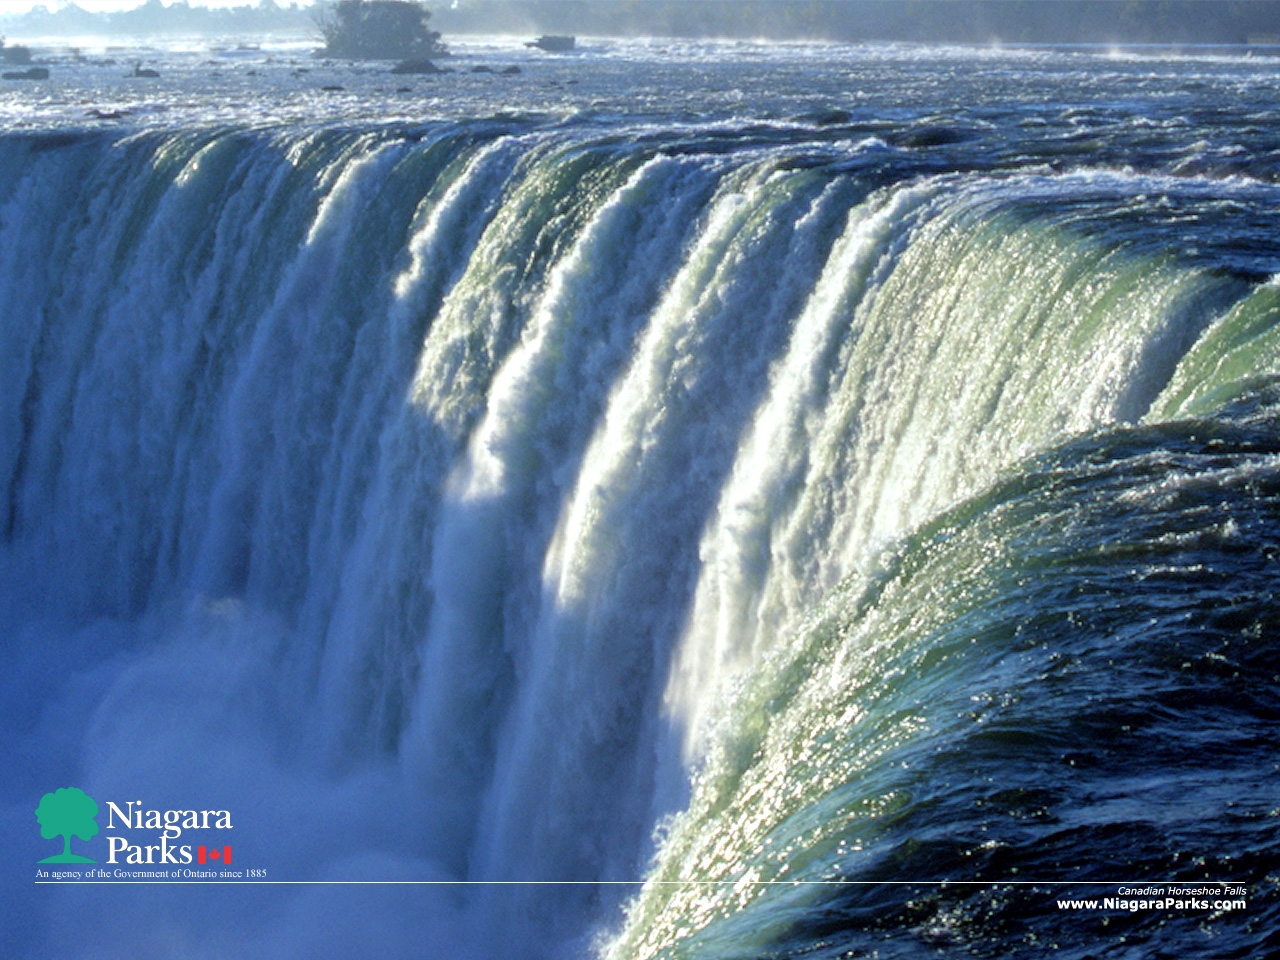  our wallpaper of the month Niagara Falls Landscapes wallpapers 1280x960